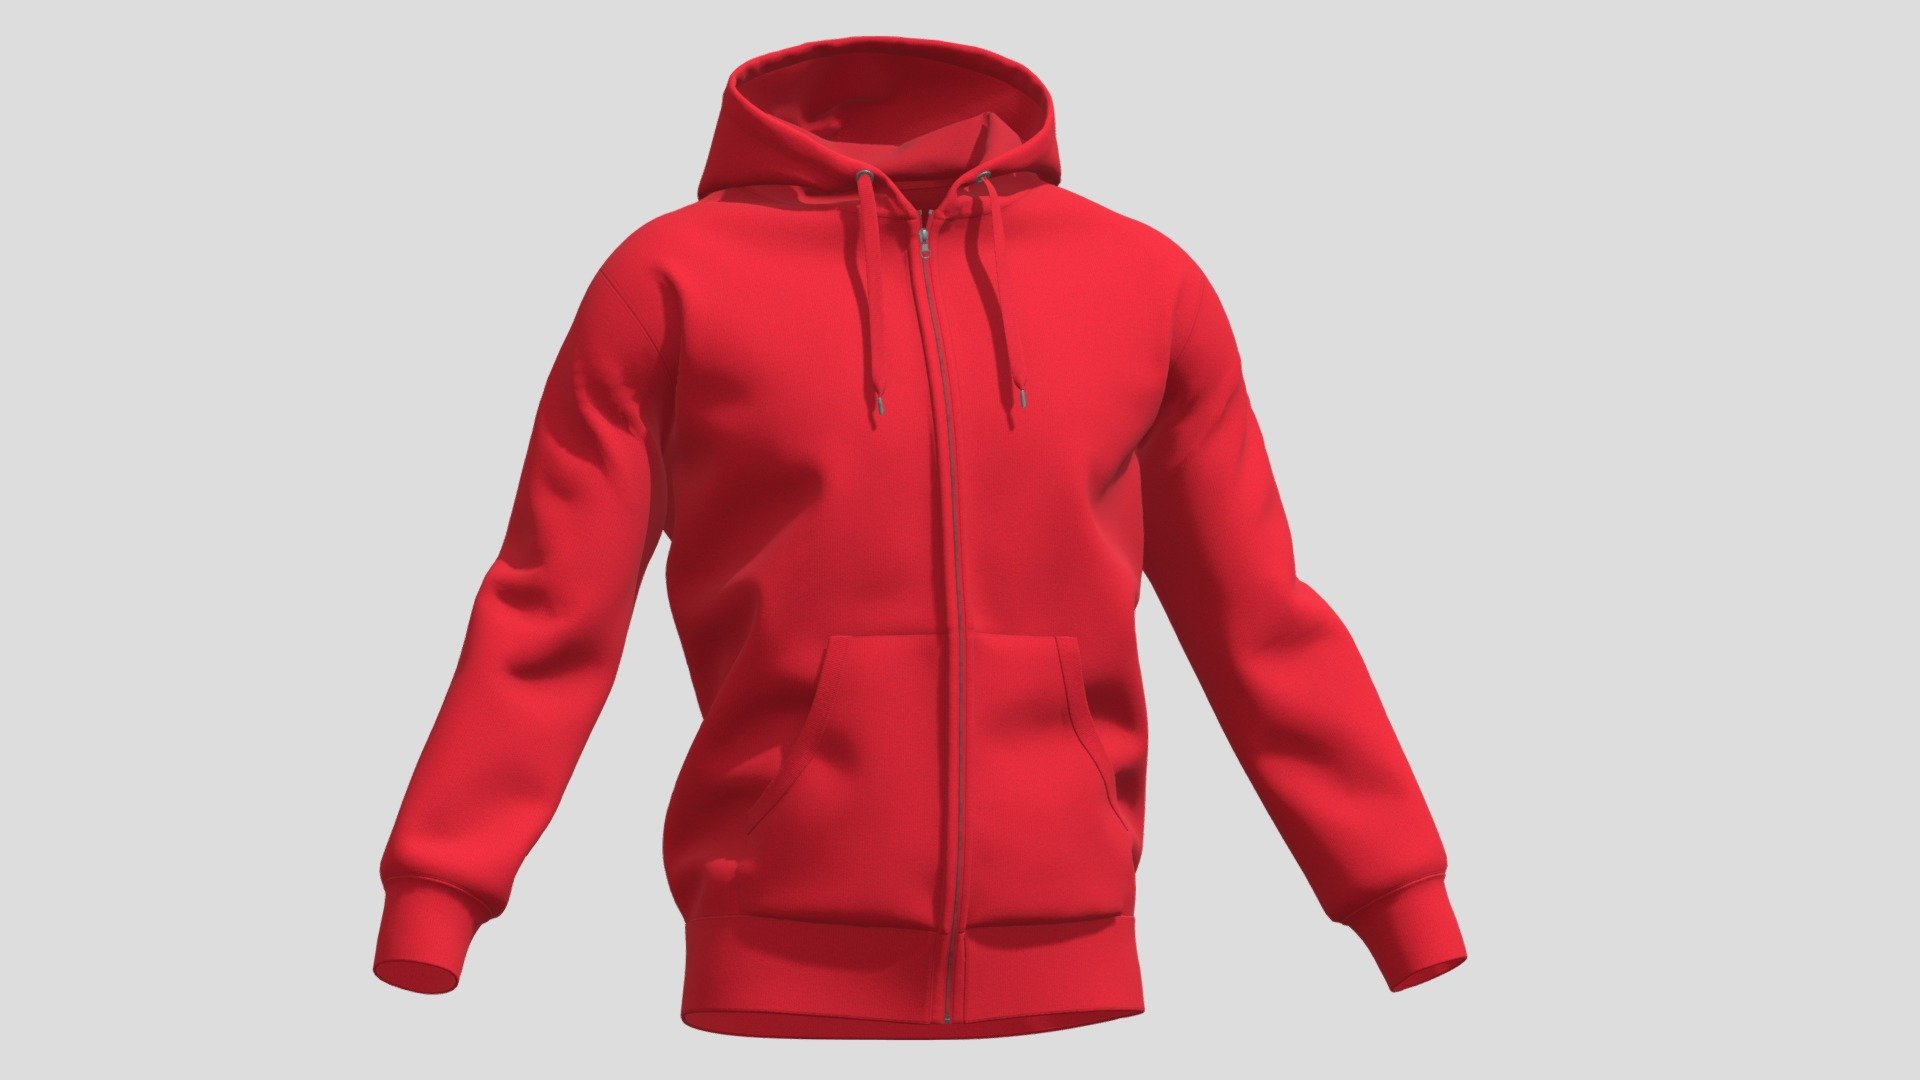 Hi, I'm Frezzy. I am leader of Cgivn studio. We are a team of talented artists working together since 2013.
If you want hire me to do 3d model please touch me at:cgivn.studio Thanks you! - Hoodie Zip Red PBR Realistic - Buy Royalty Free 3D model by Frezzy (@frezzy3d) 3d model